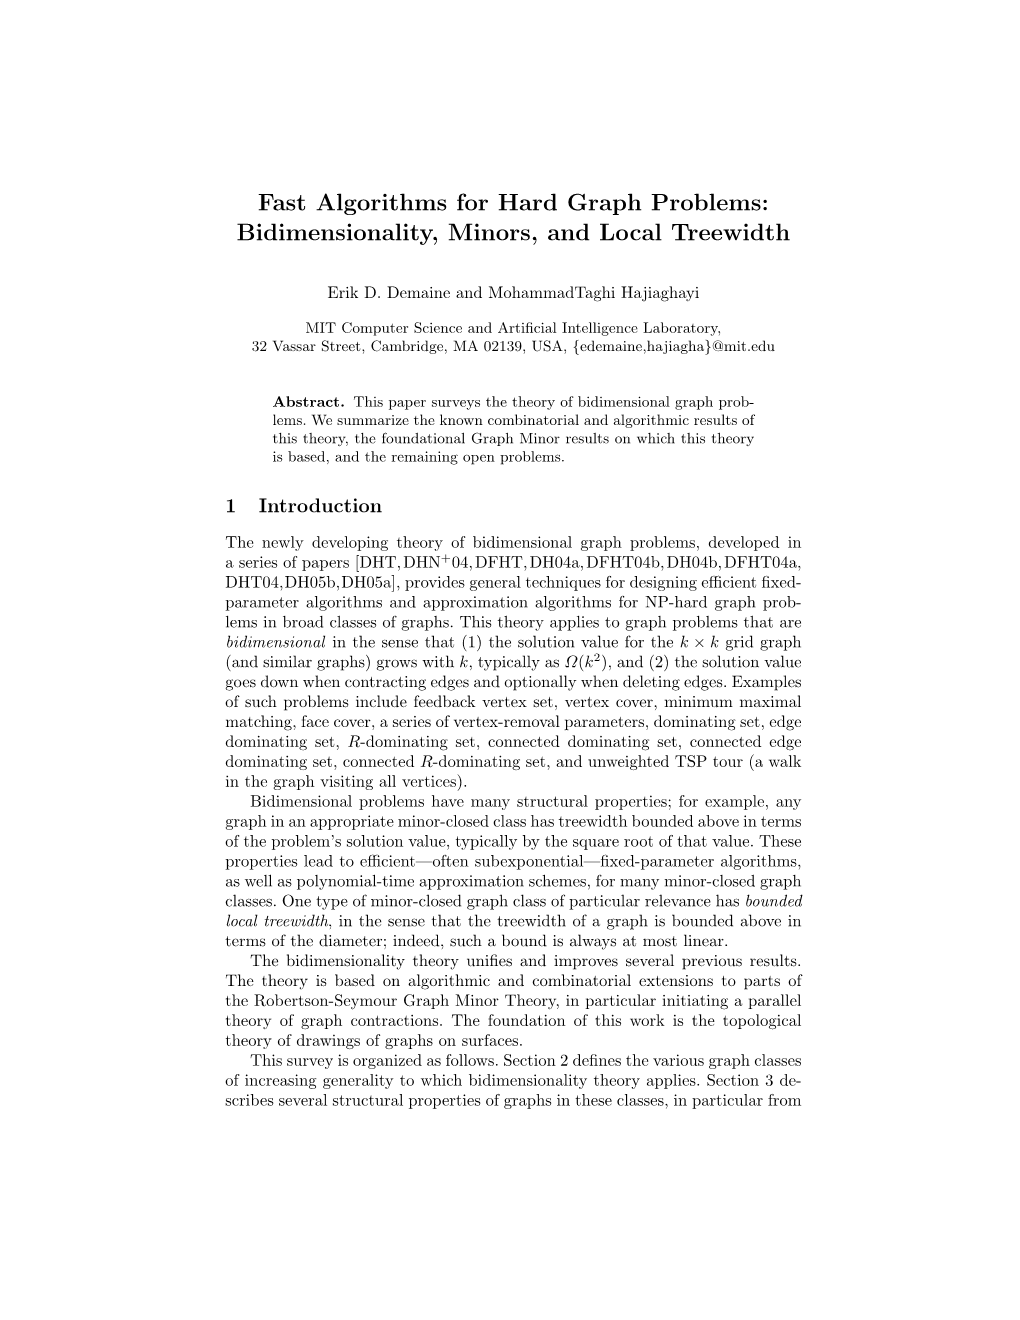 Fast Algorithms for Hard Graph Problems: Bidimensionality, Minors, and Local Treewidth